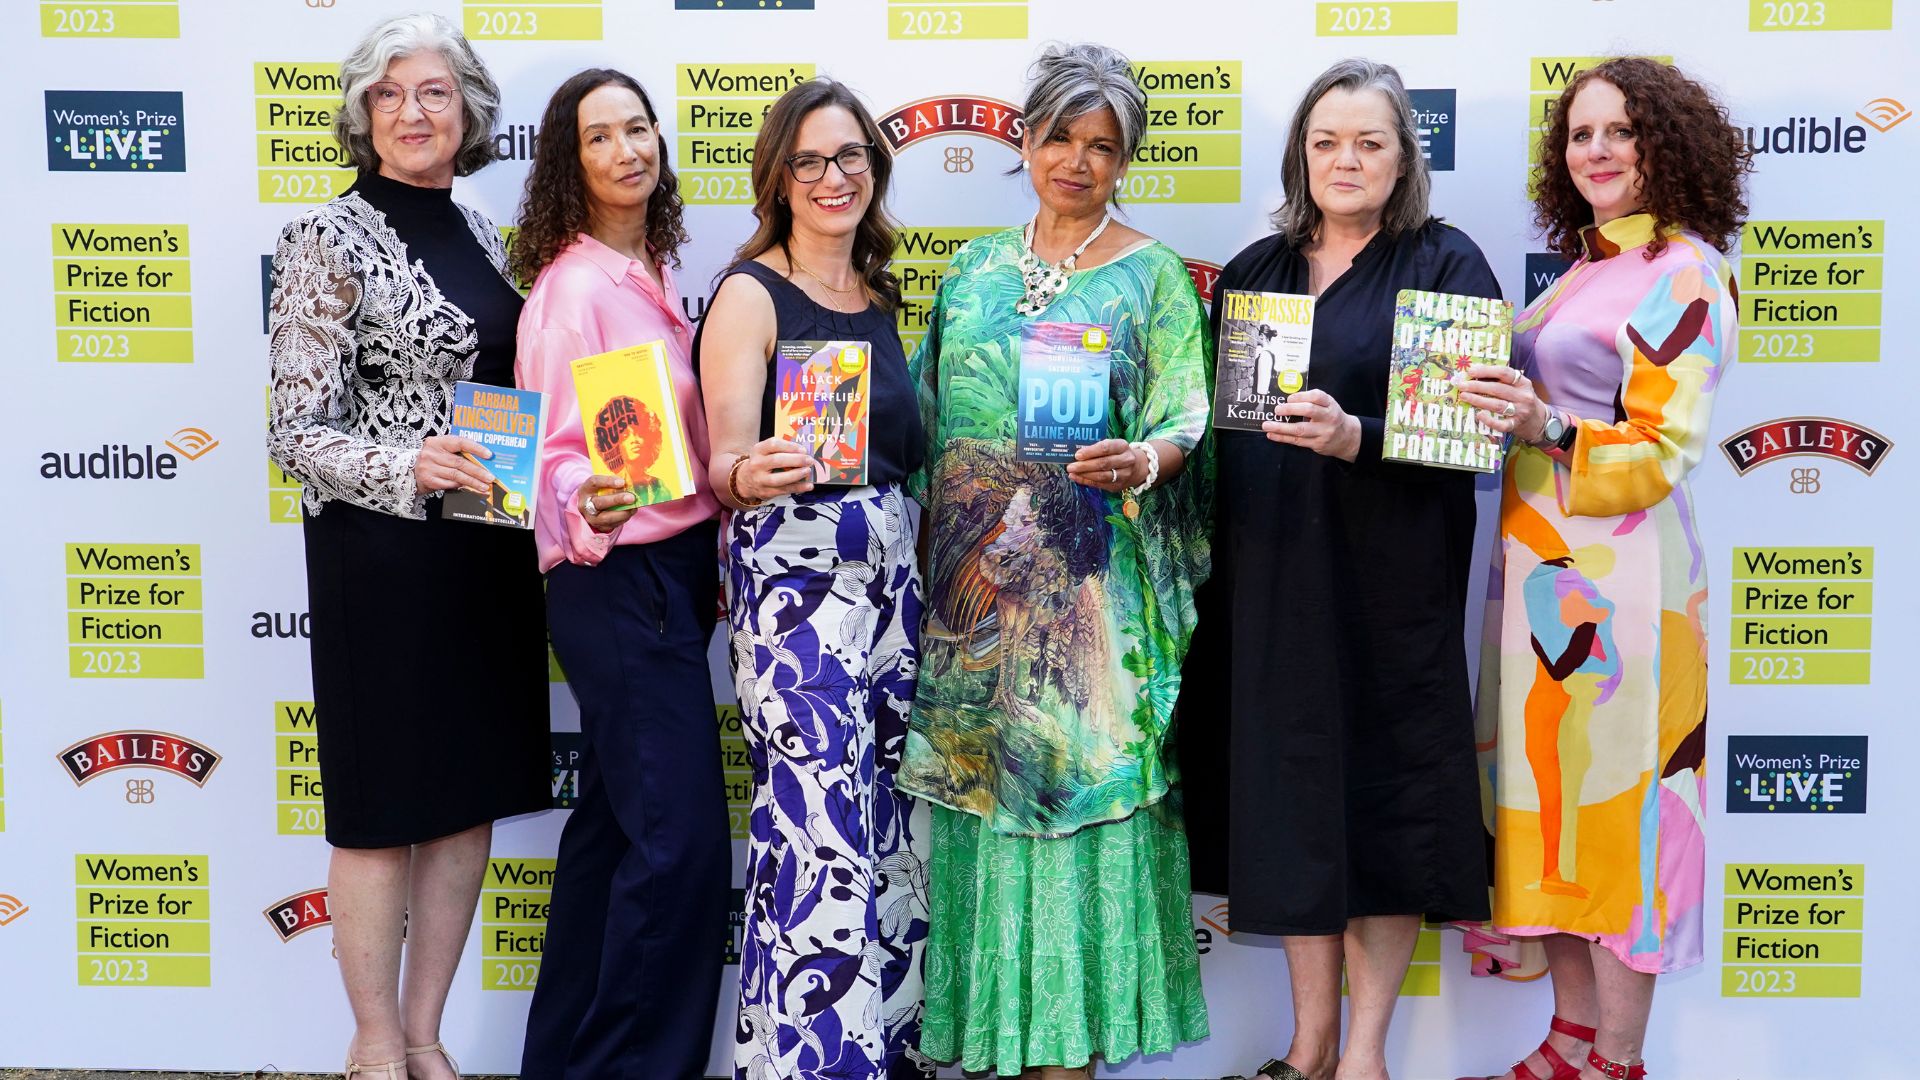 Authors Barbara Kingsolver, Jacqueline Crooks, Priscilla Morris, Laline Paull, Louise Kennedy and Maggie O’Farrell attend the 2023 Women's Prize For Fiction Winner's Ceremony © Ian West/PA Wire